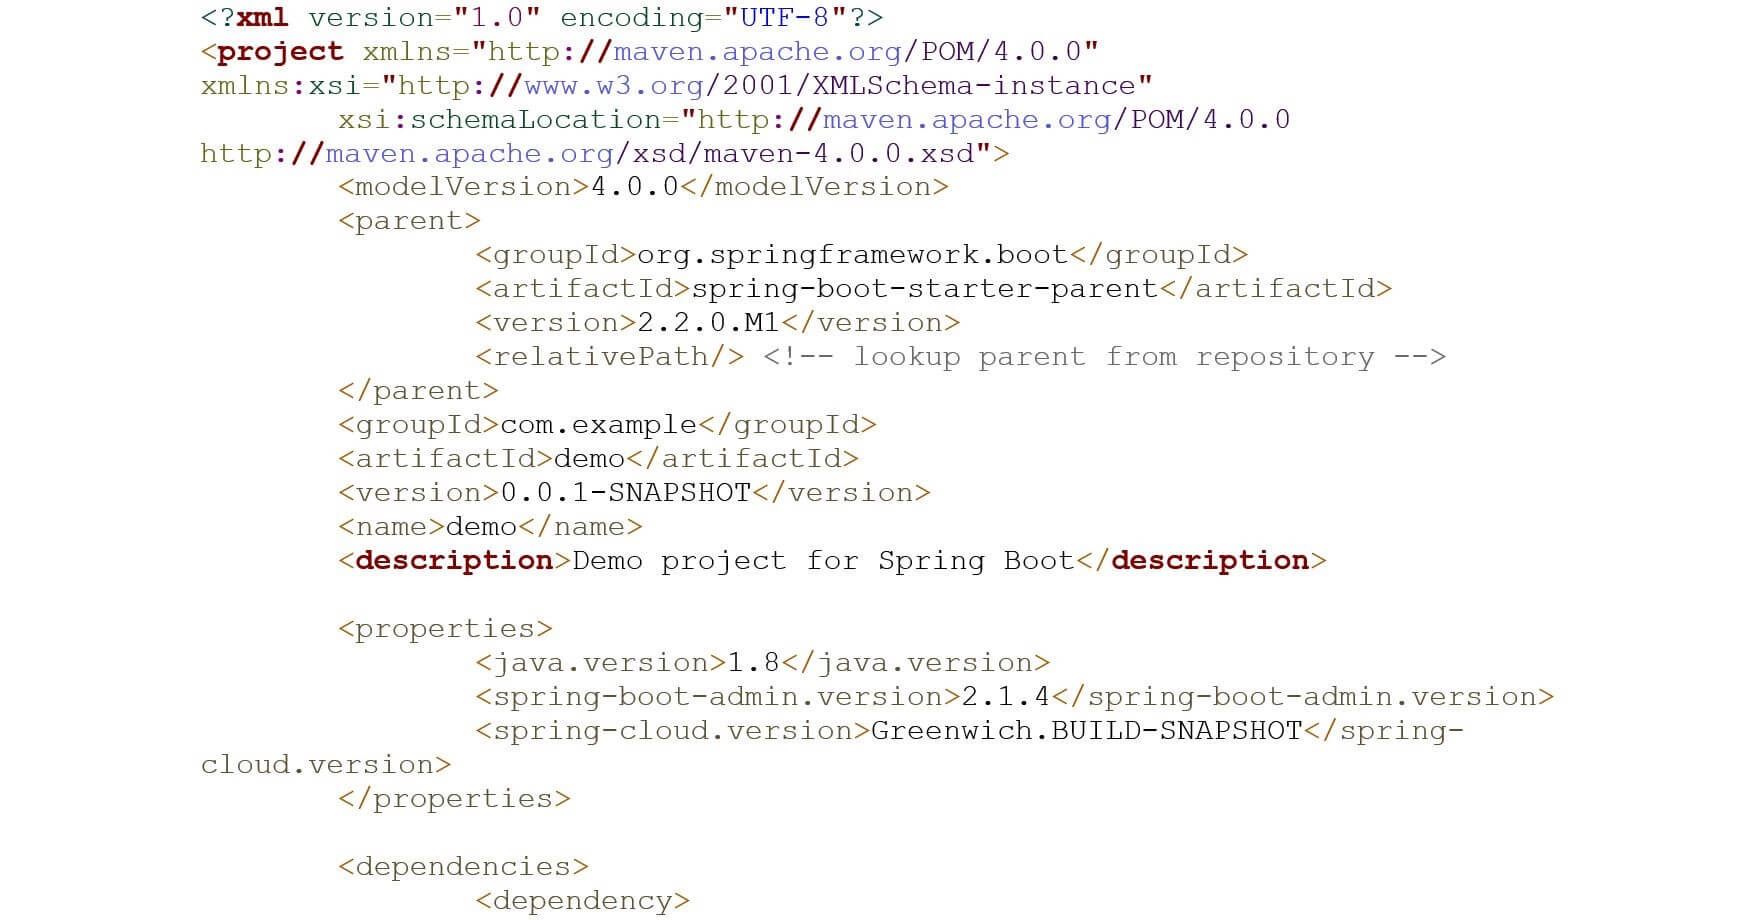 Excerpt from a generated pom.xml Maven configuration file